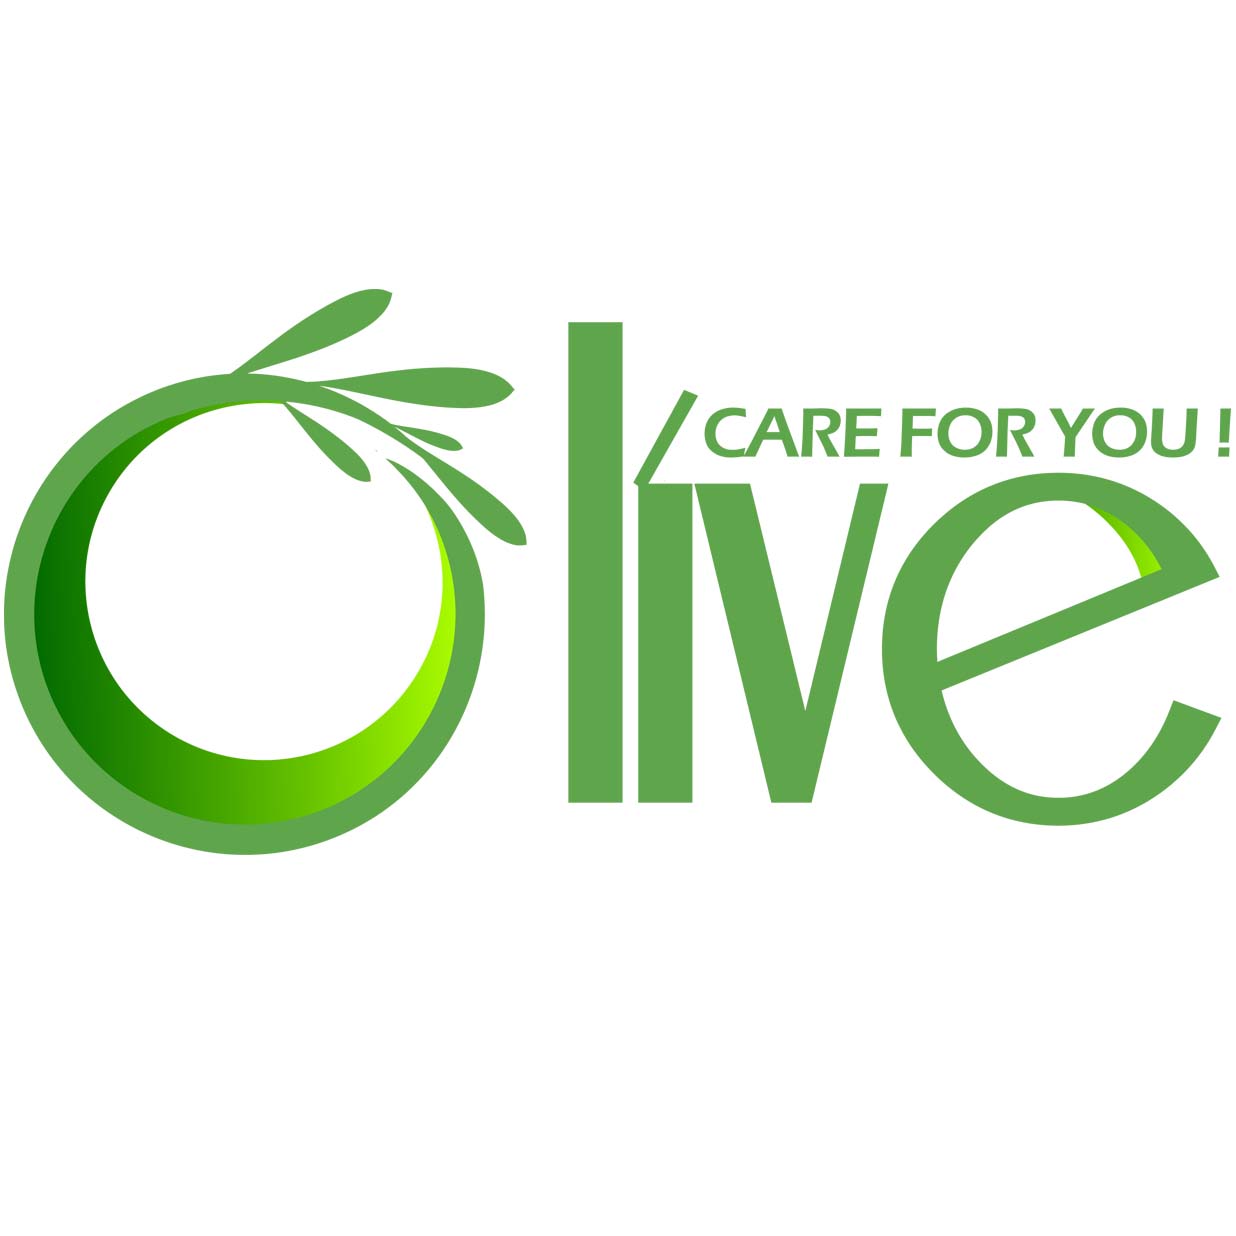 OLIVE, Care For You!